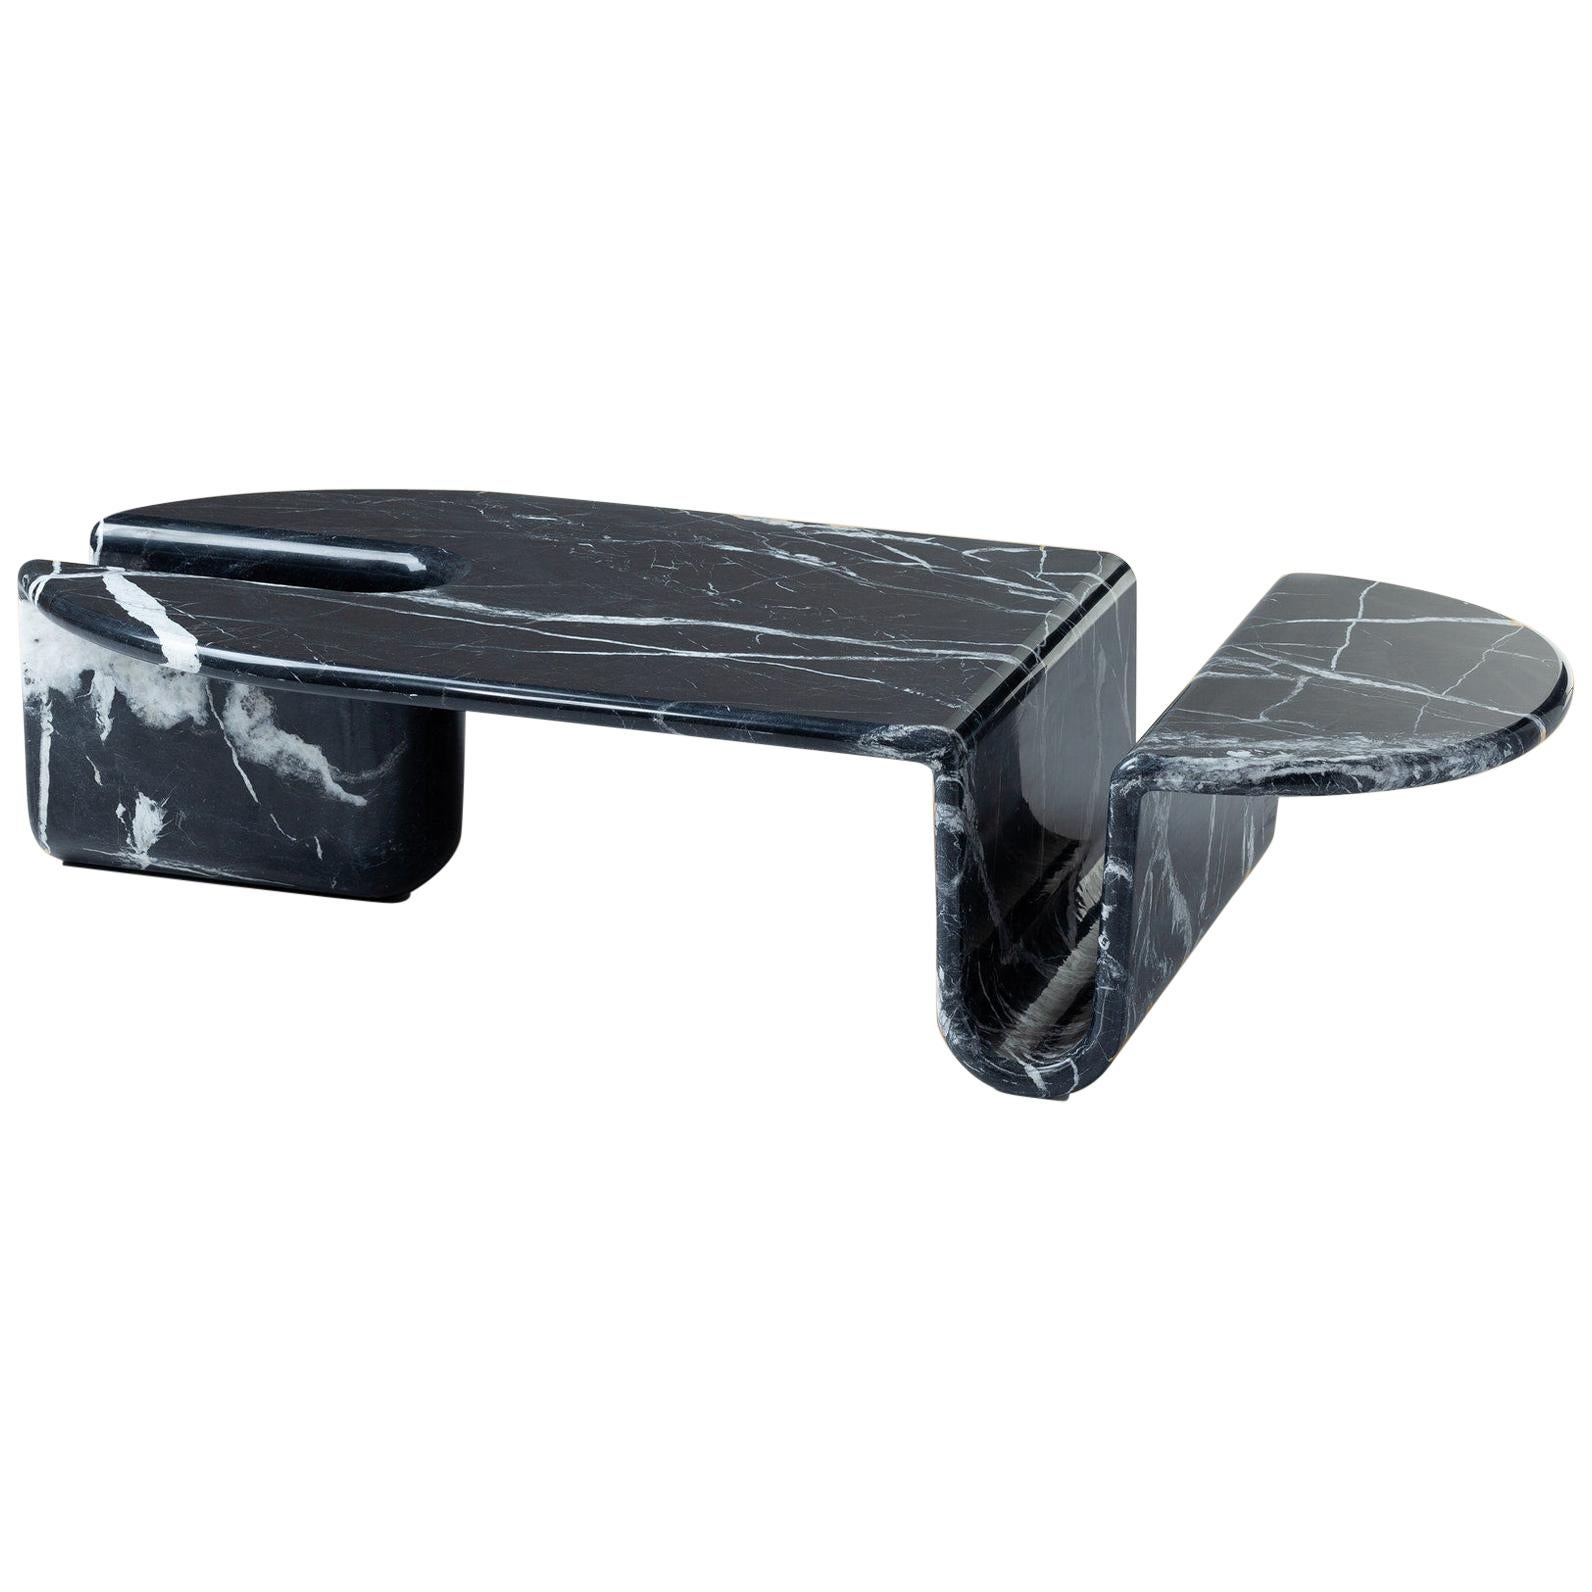 DOOQ Coffee or Center Table Carved from Solid Nero Marquina Marble Bonnie& Clyde